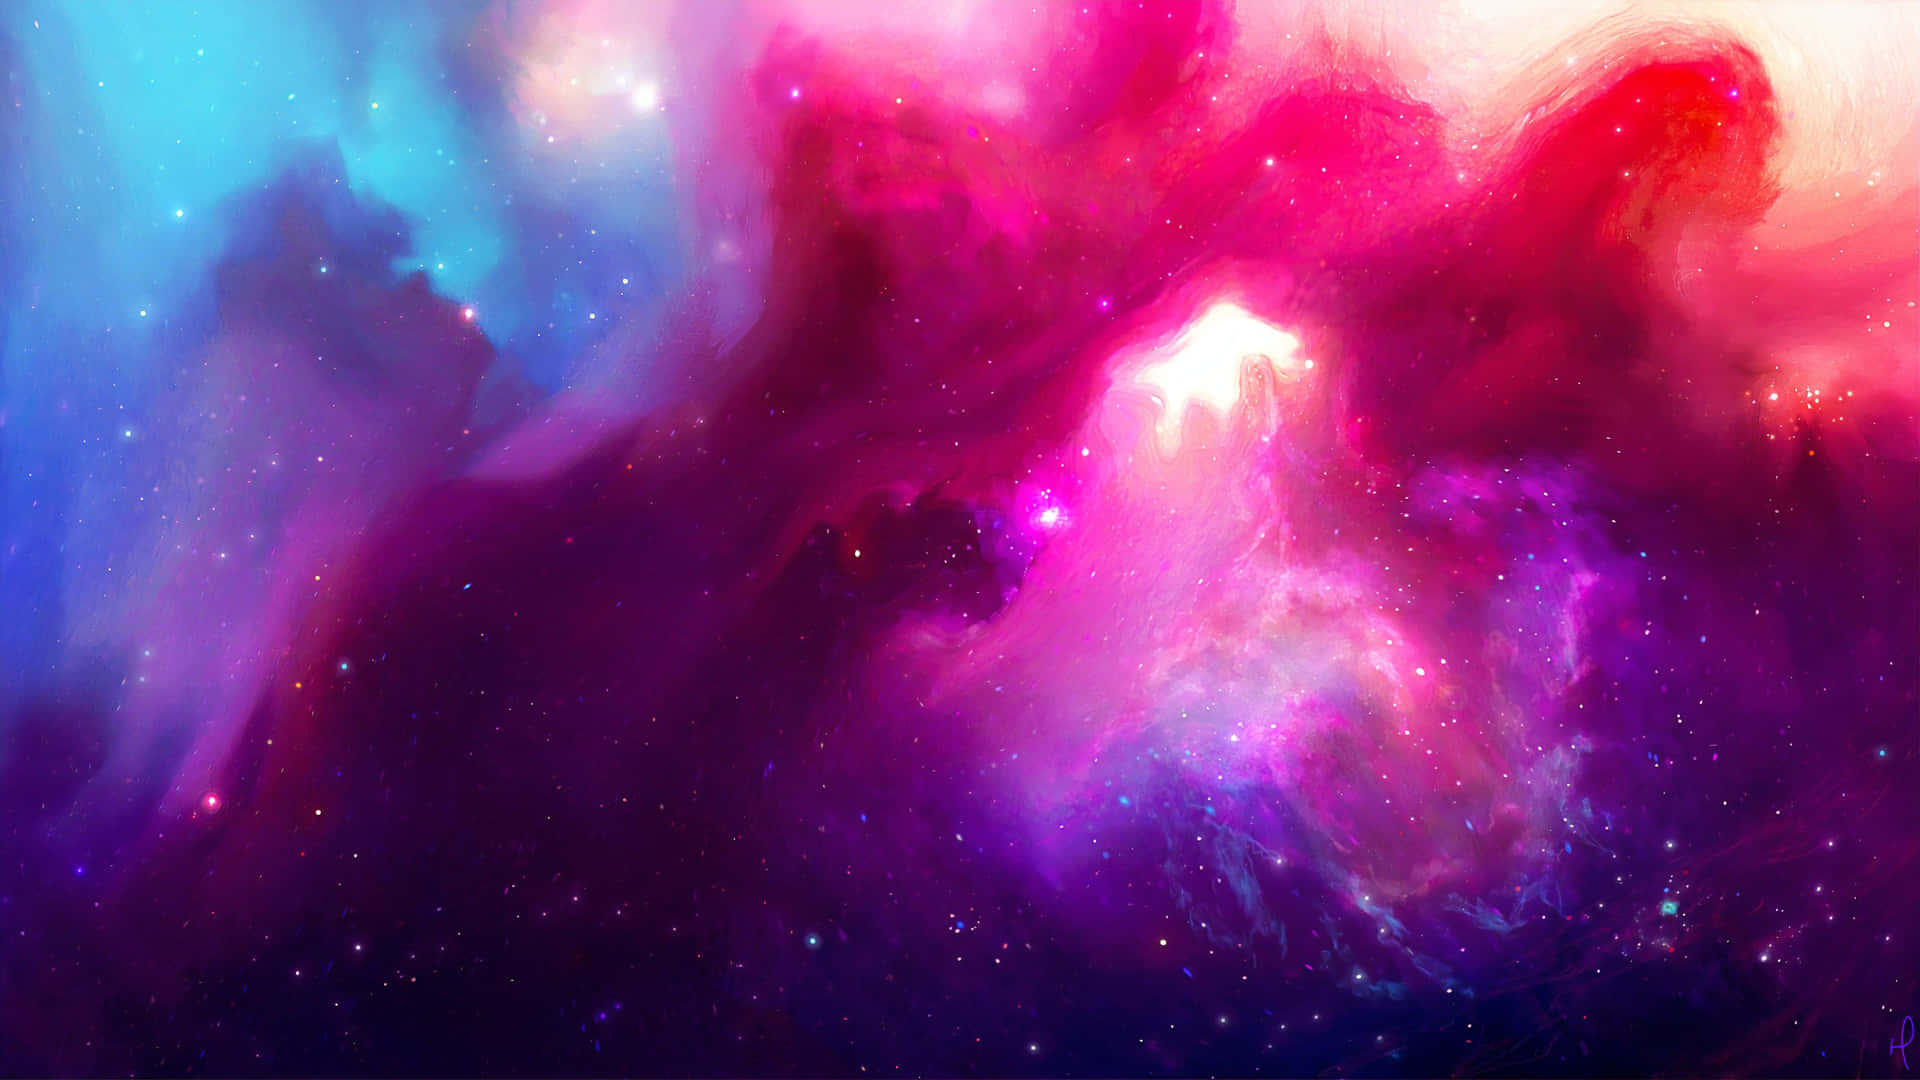 "Discover the Beauty of the Cosmos" Wallpaper